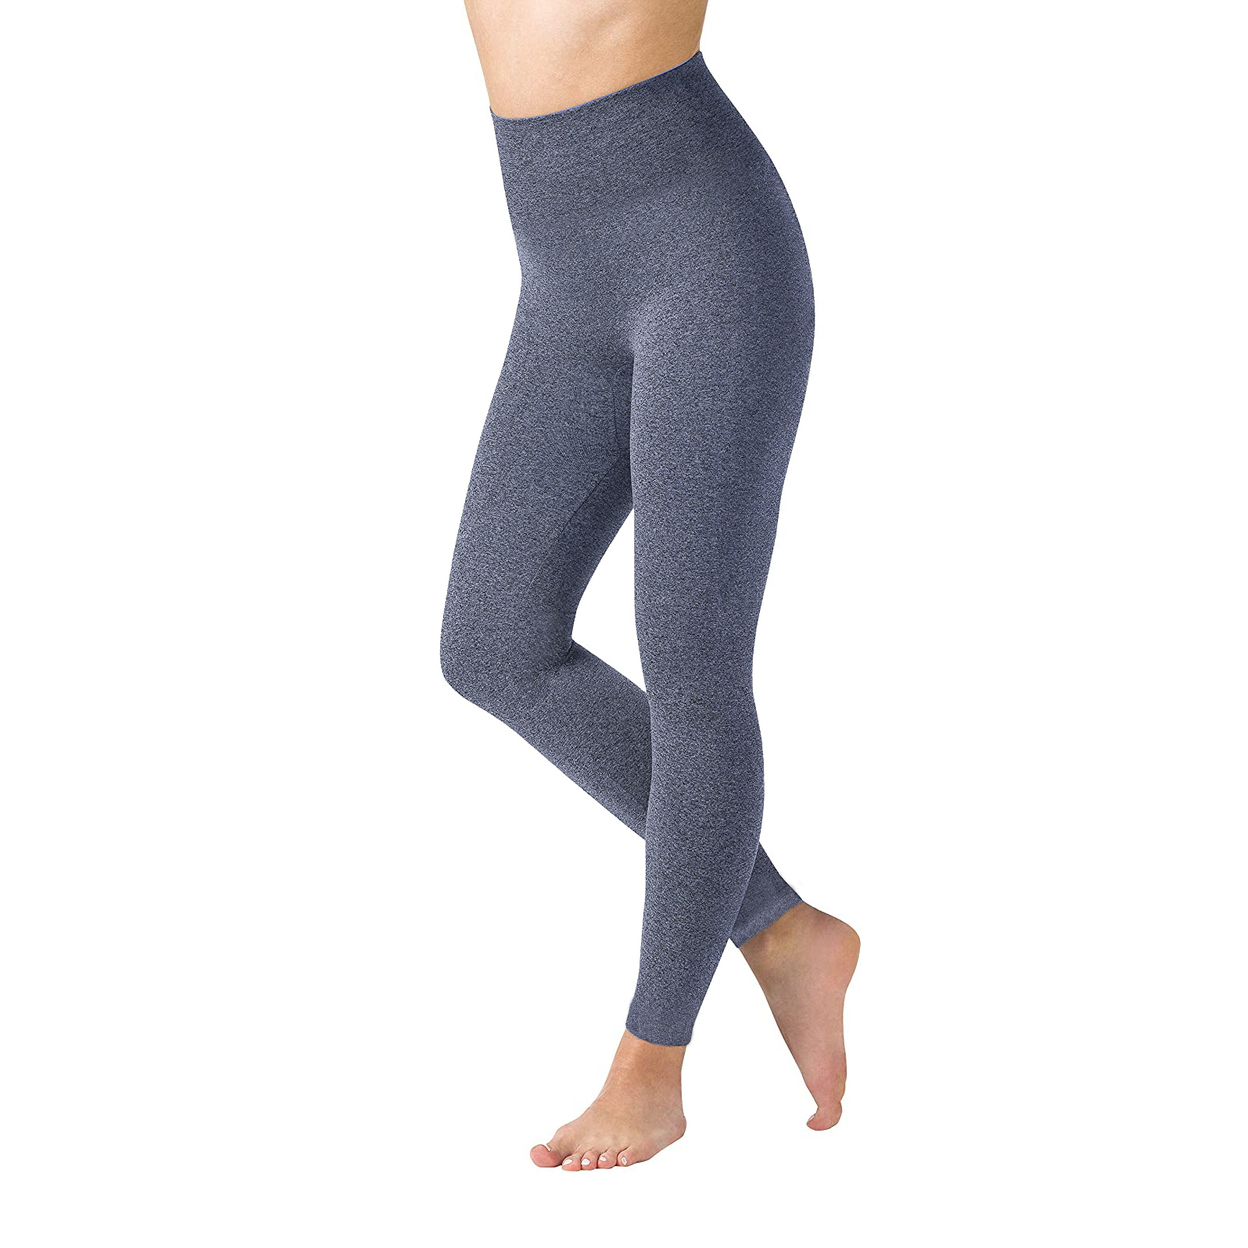 Women's High Waisted Ultra-Soft Fleece Lined Warm Marled Leggings(Available In Plus Sizes) - Navy, Medium